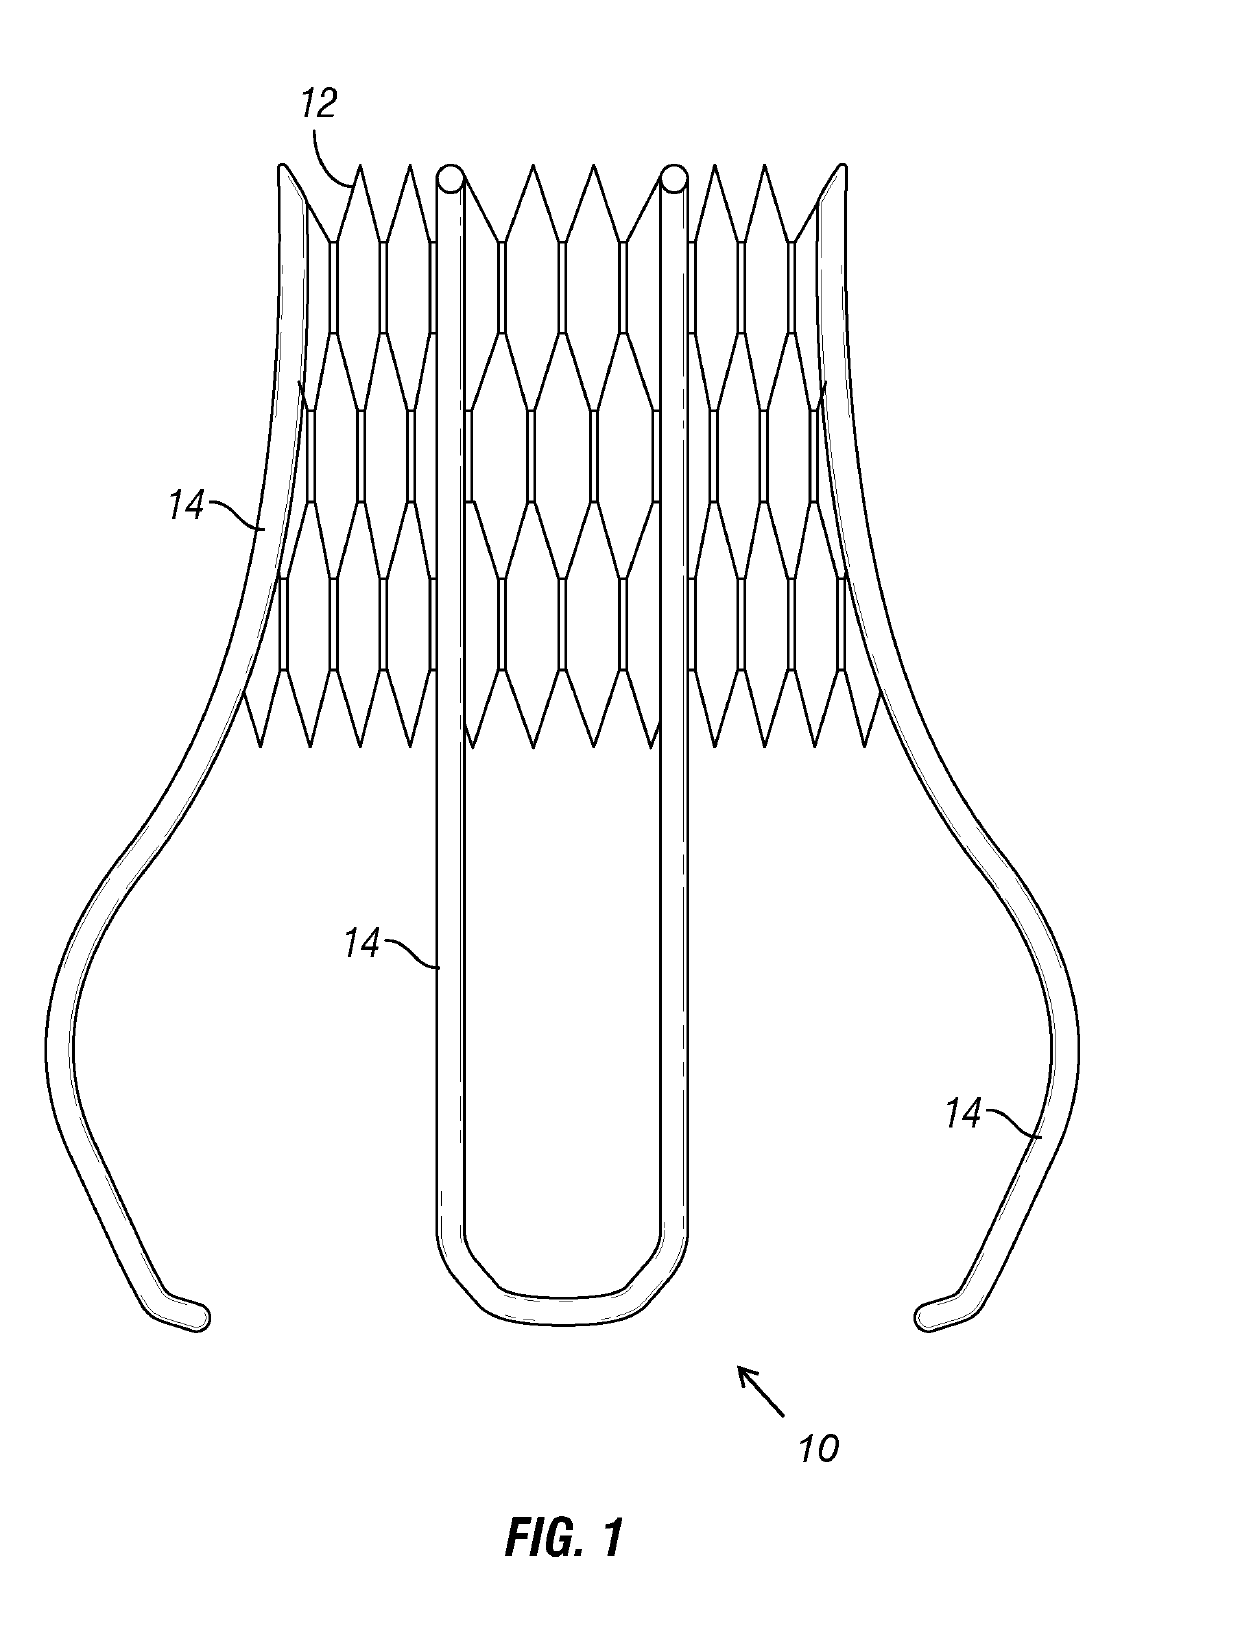 Docking Device for Aortic Valve Replacement